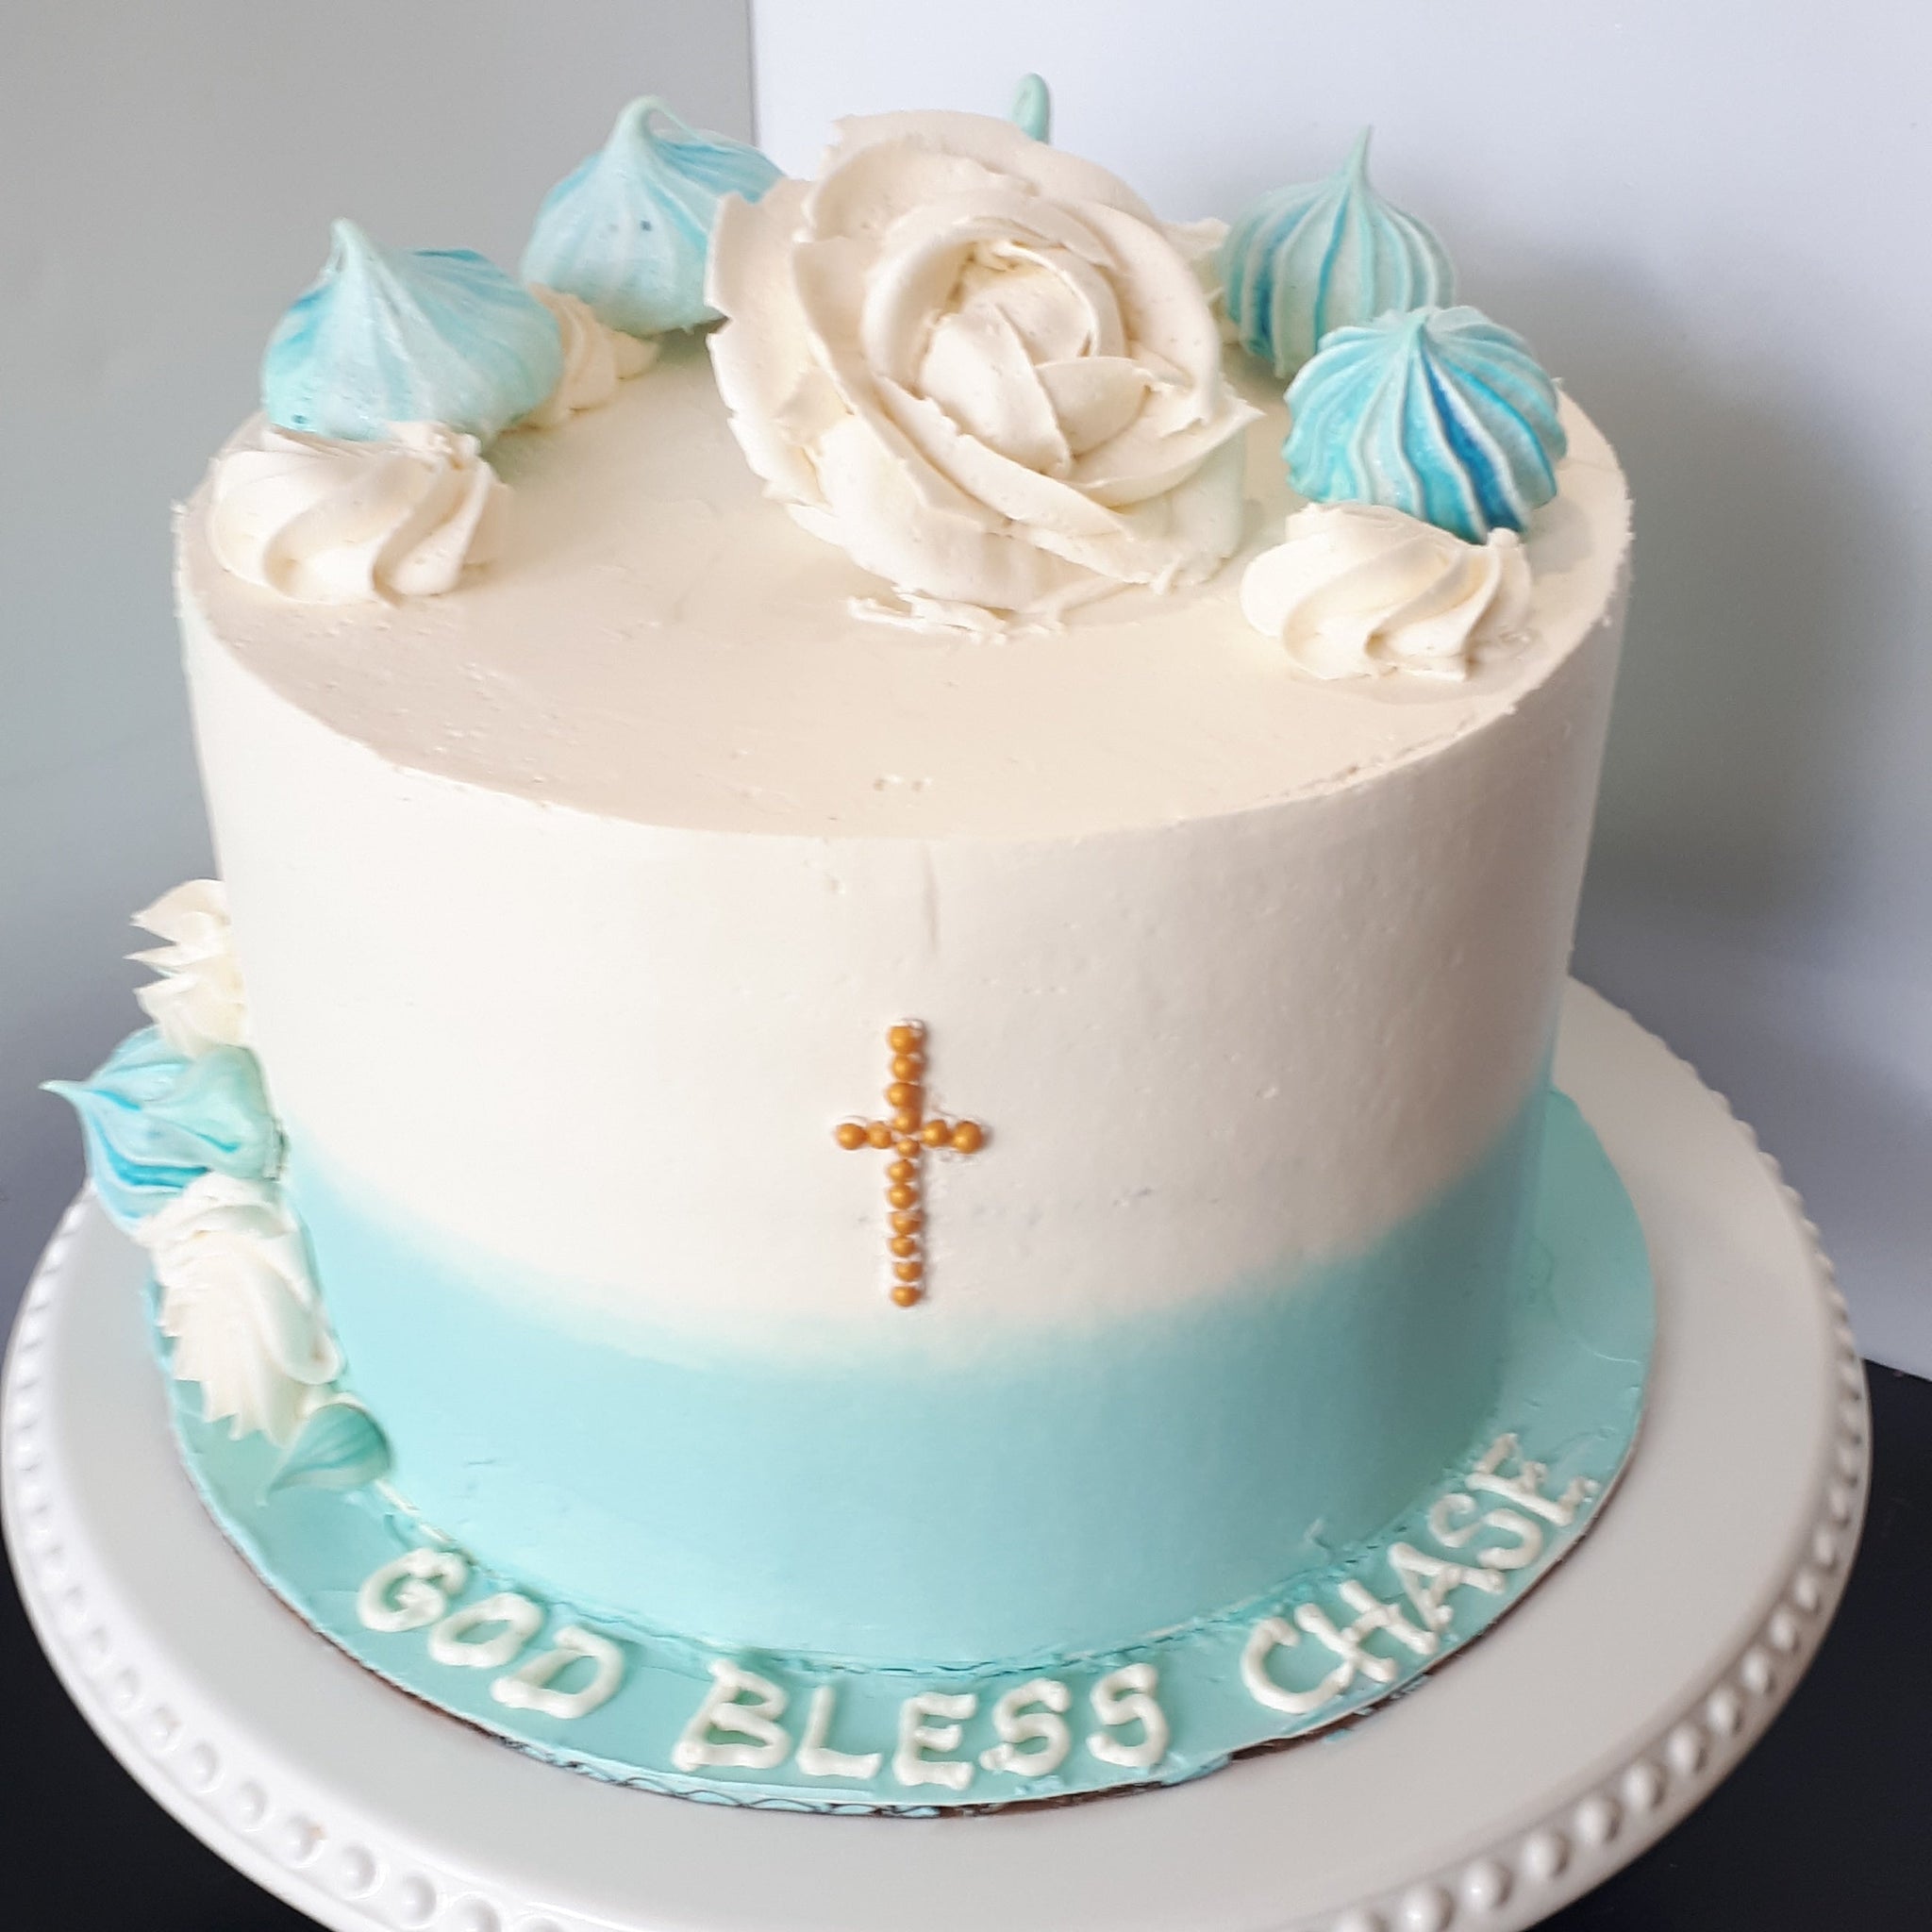 First Communion cakes